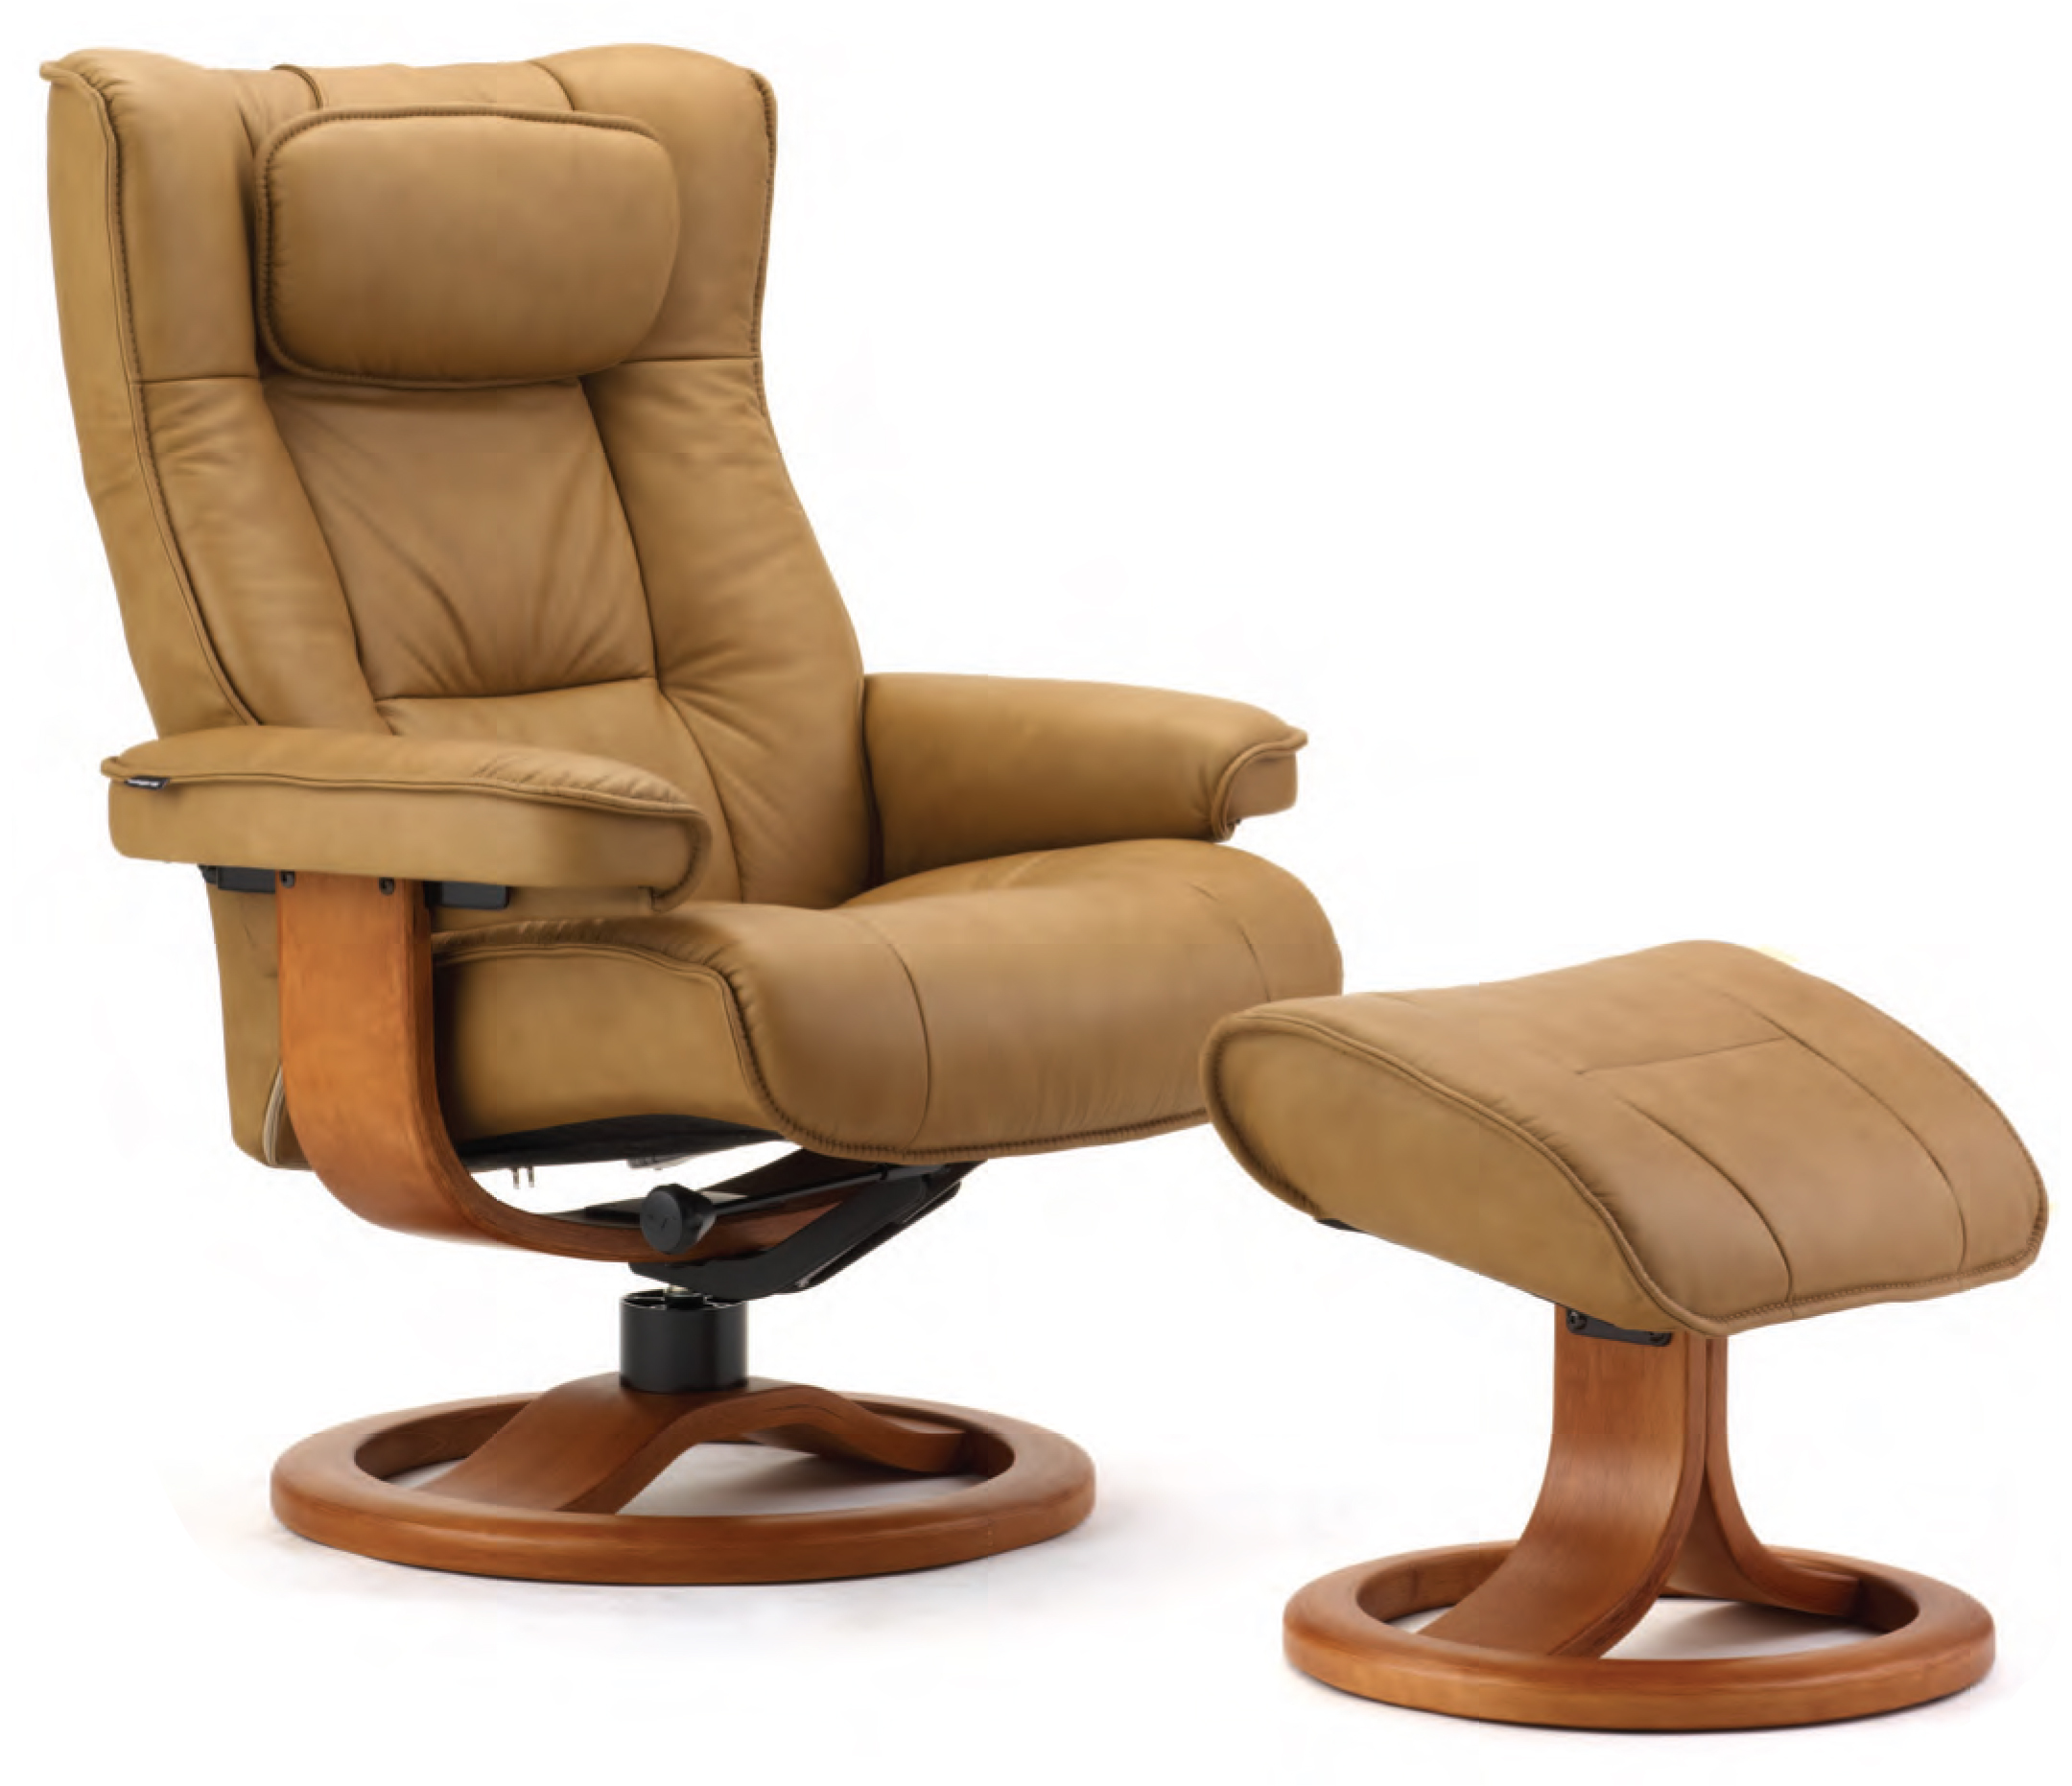 Leather Recliner Chair Ottoman, Scandinavian Leather Recliner Chairs